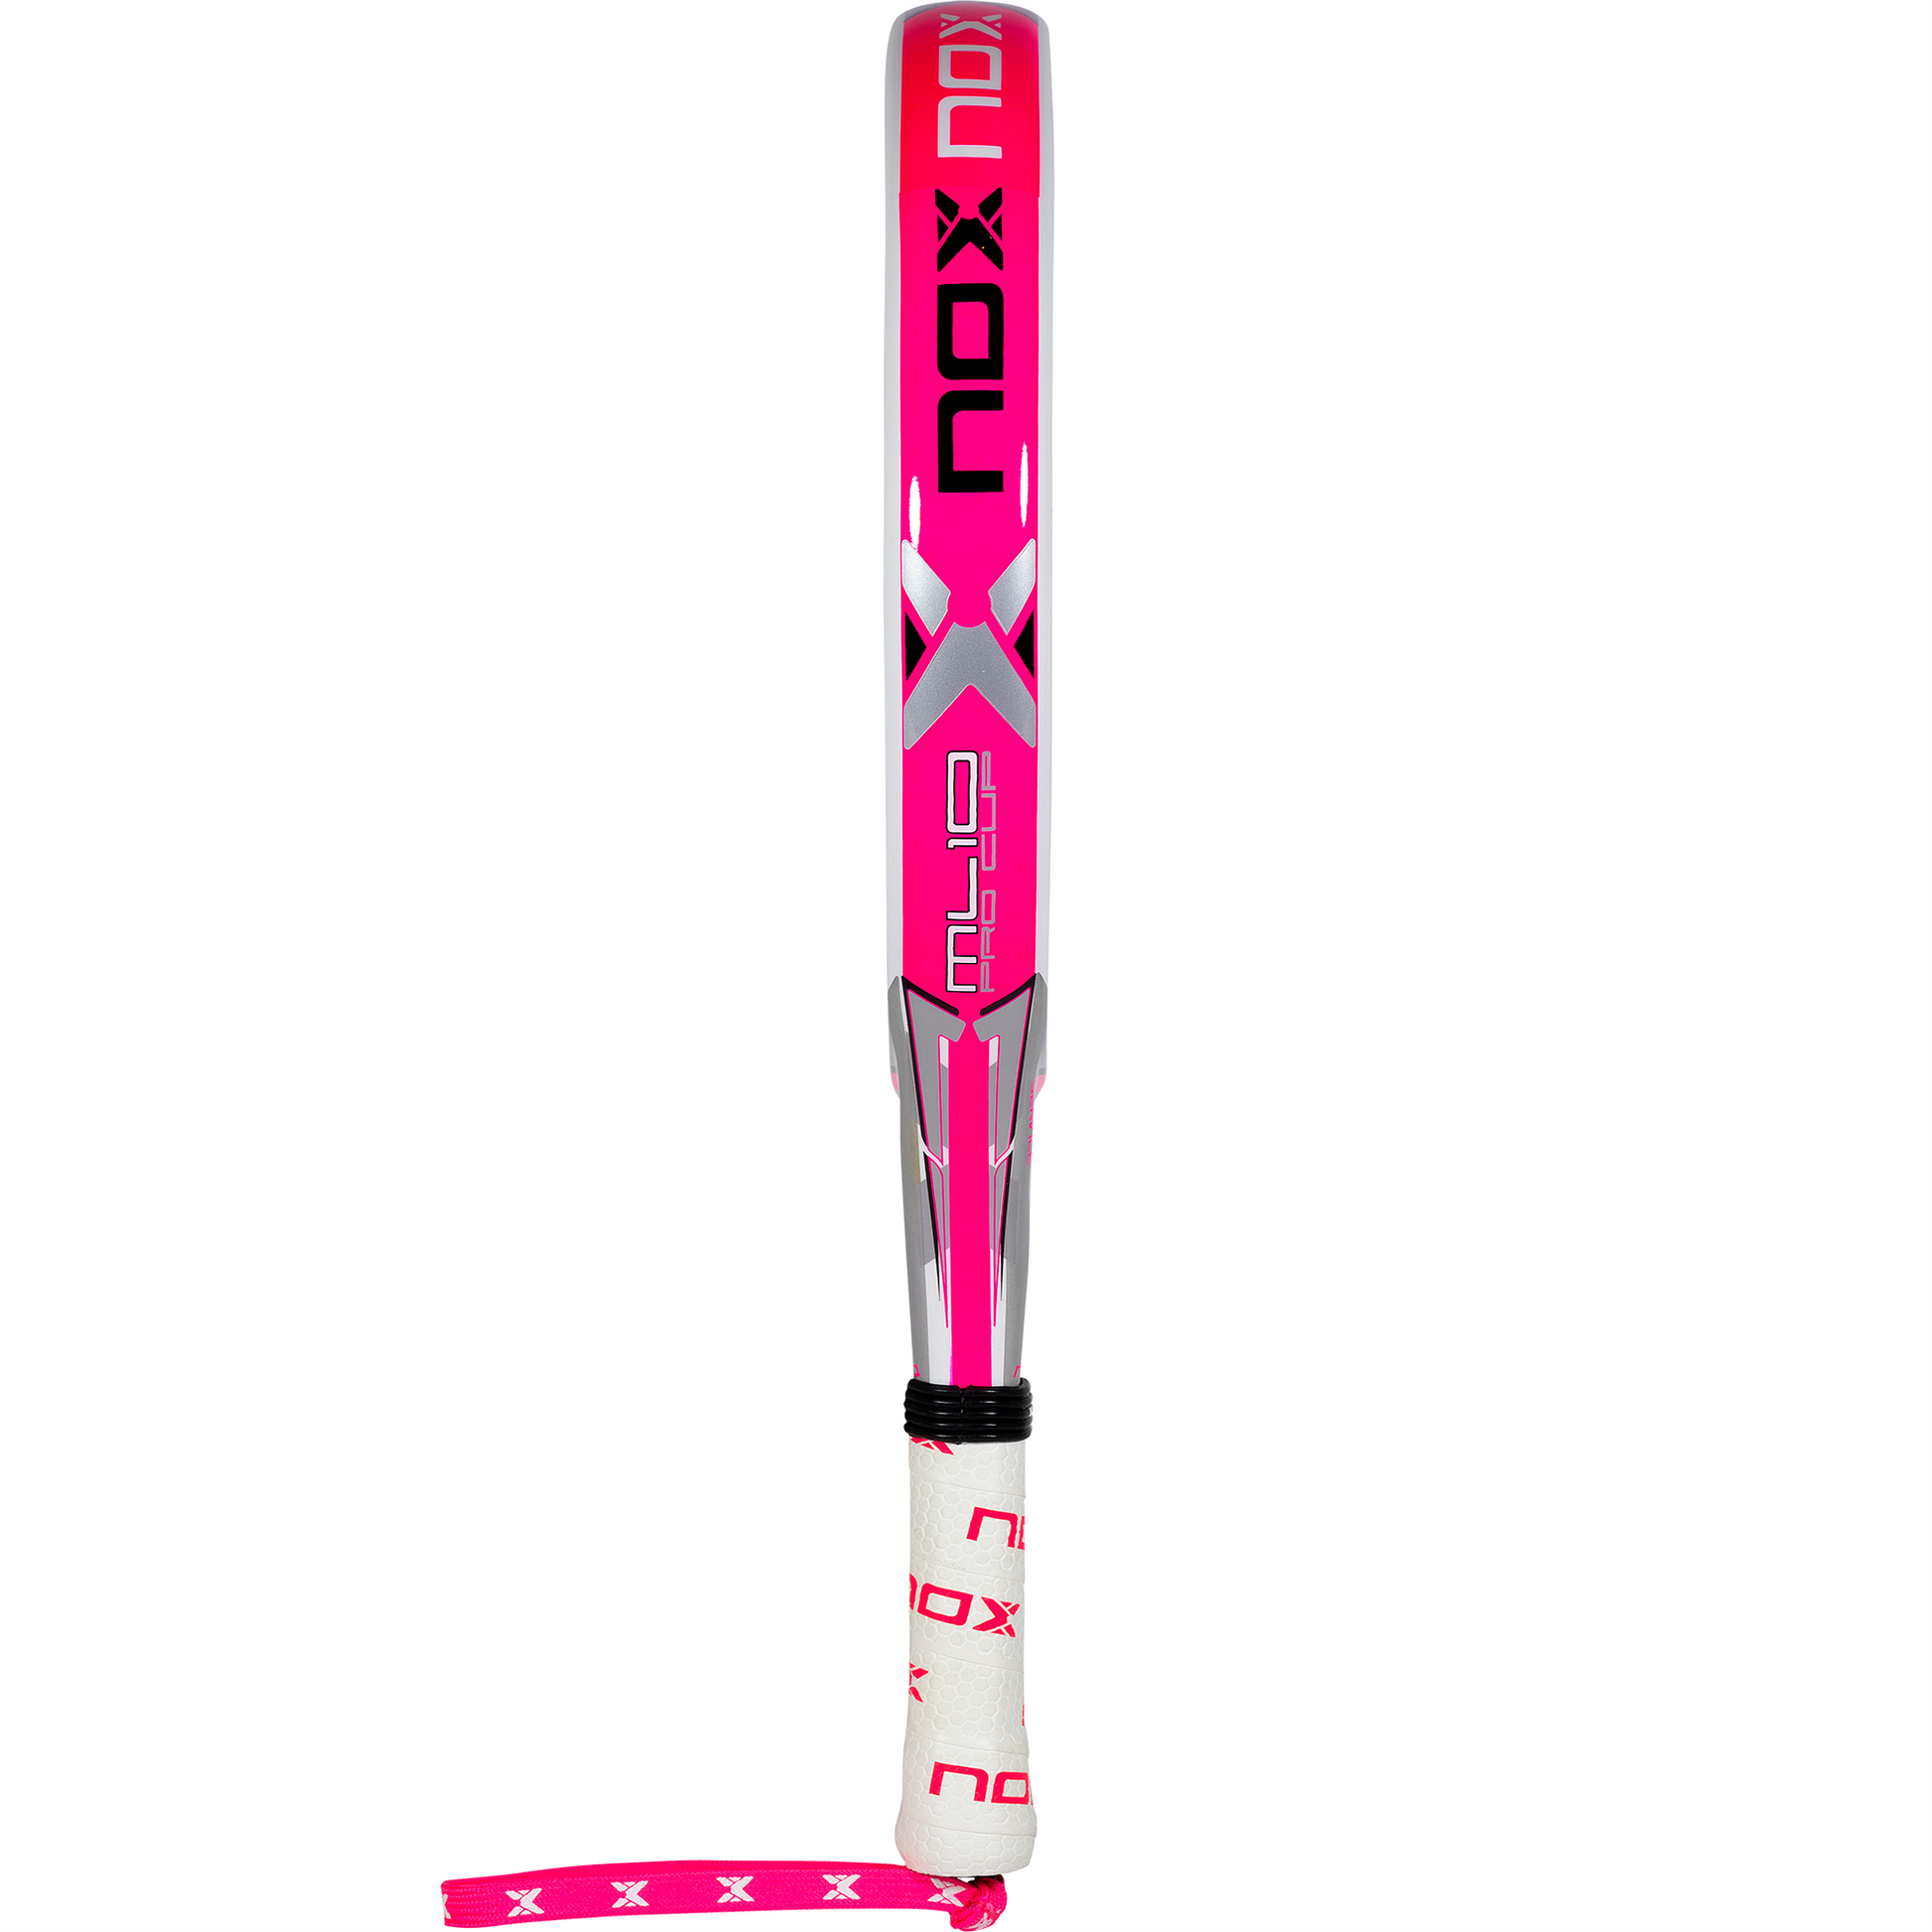 Side view of the Nox ML10 Pro Cup Silver padel racket on sale in NZ at thepadelshop.co.nz